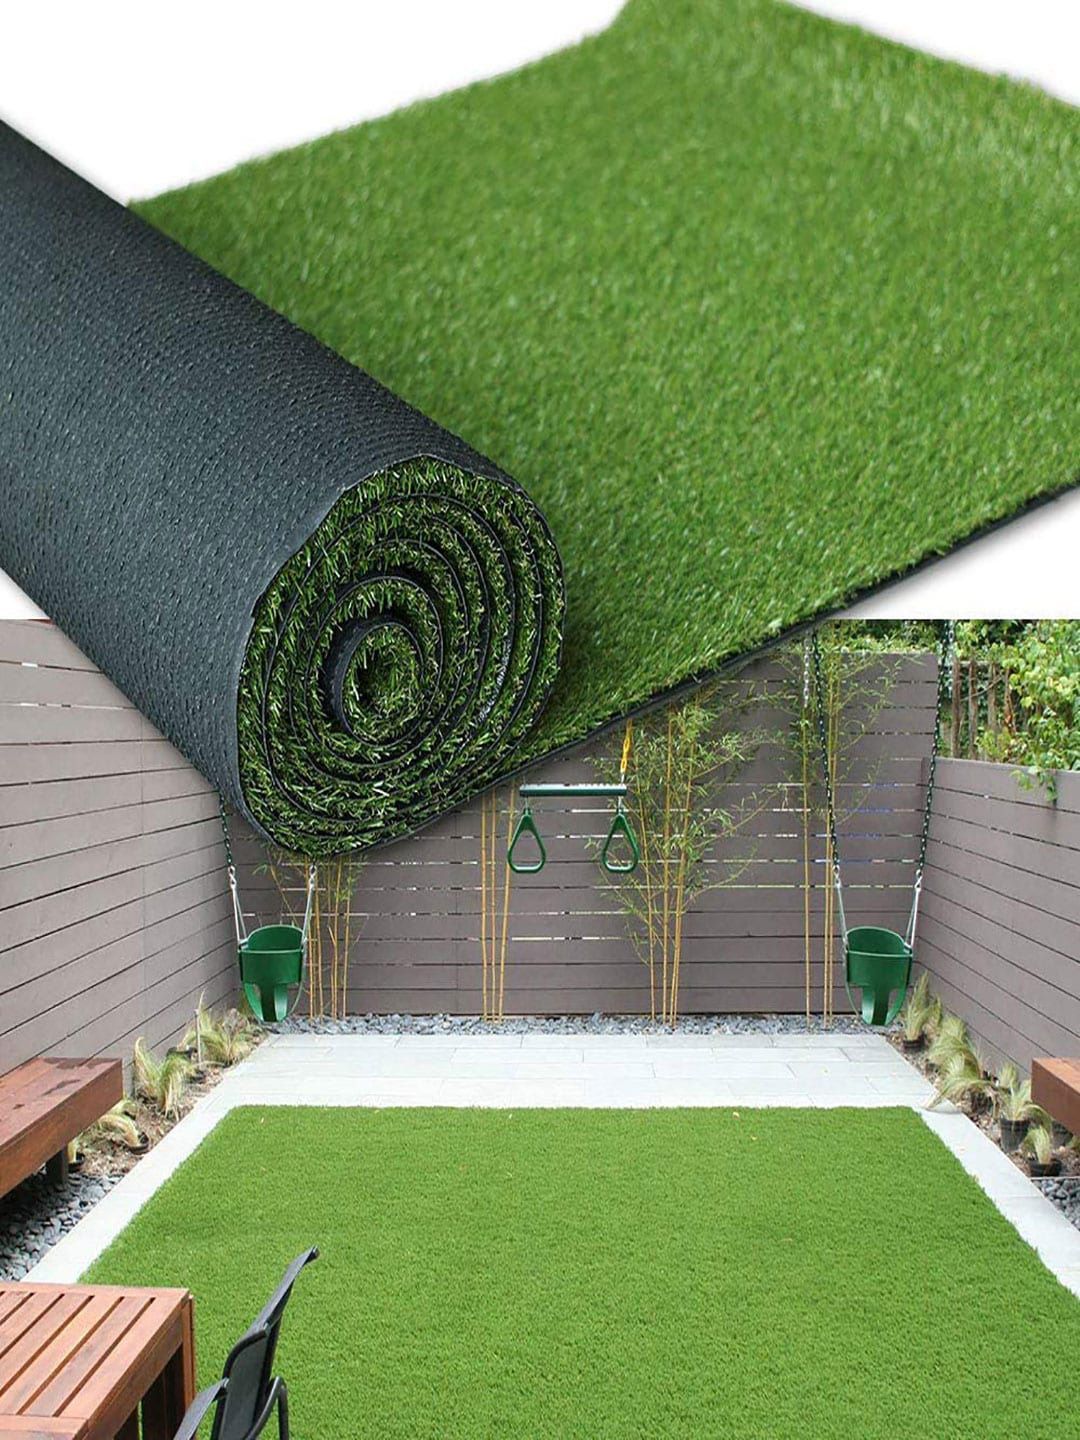 LUXEHOME INTERNATIONAL Green Artificial Grass Floor Mats Price in India